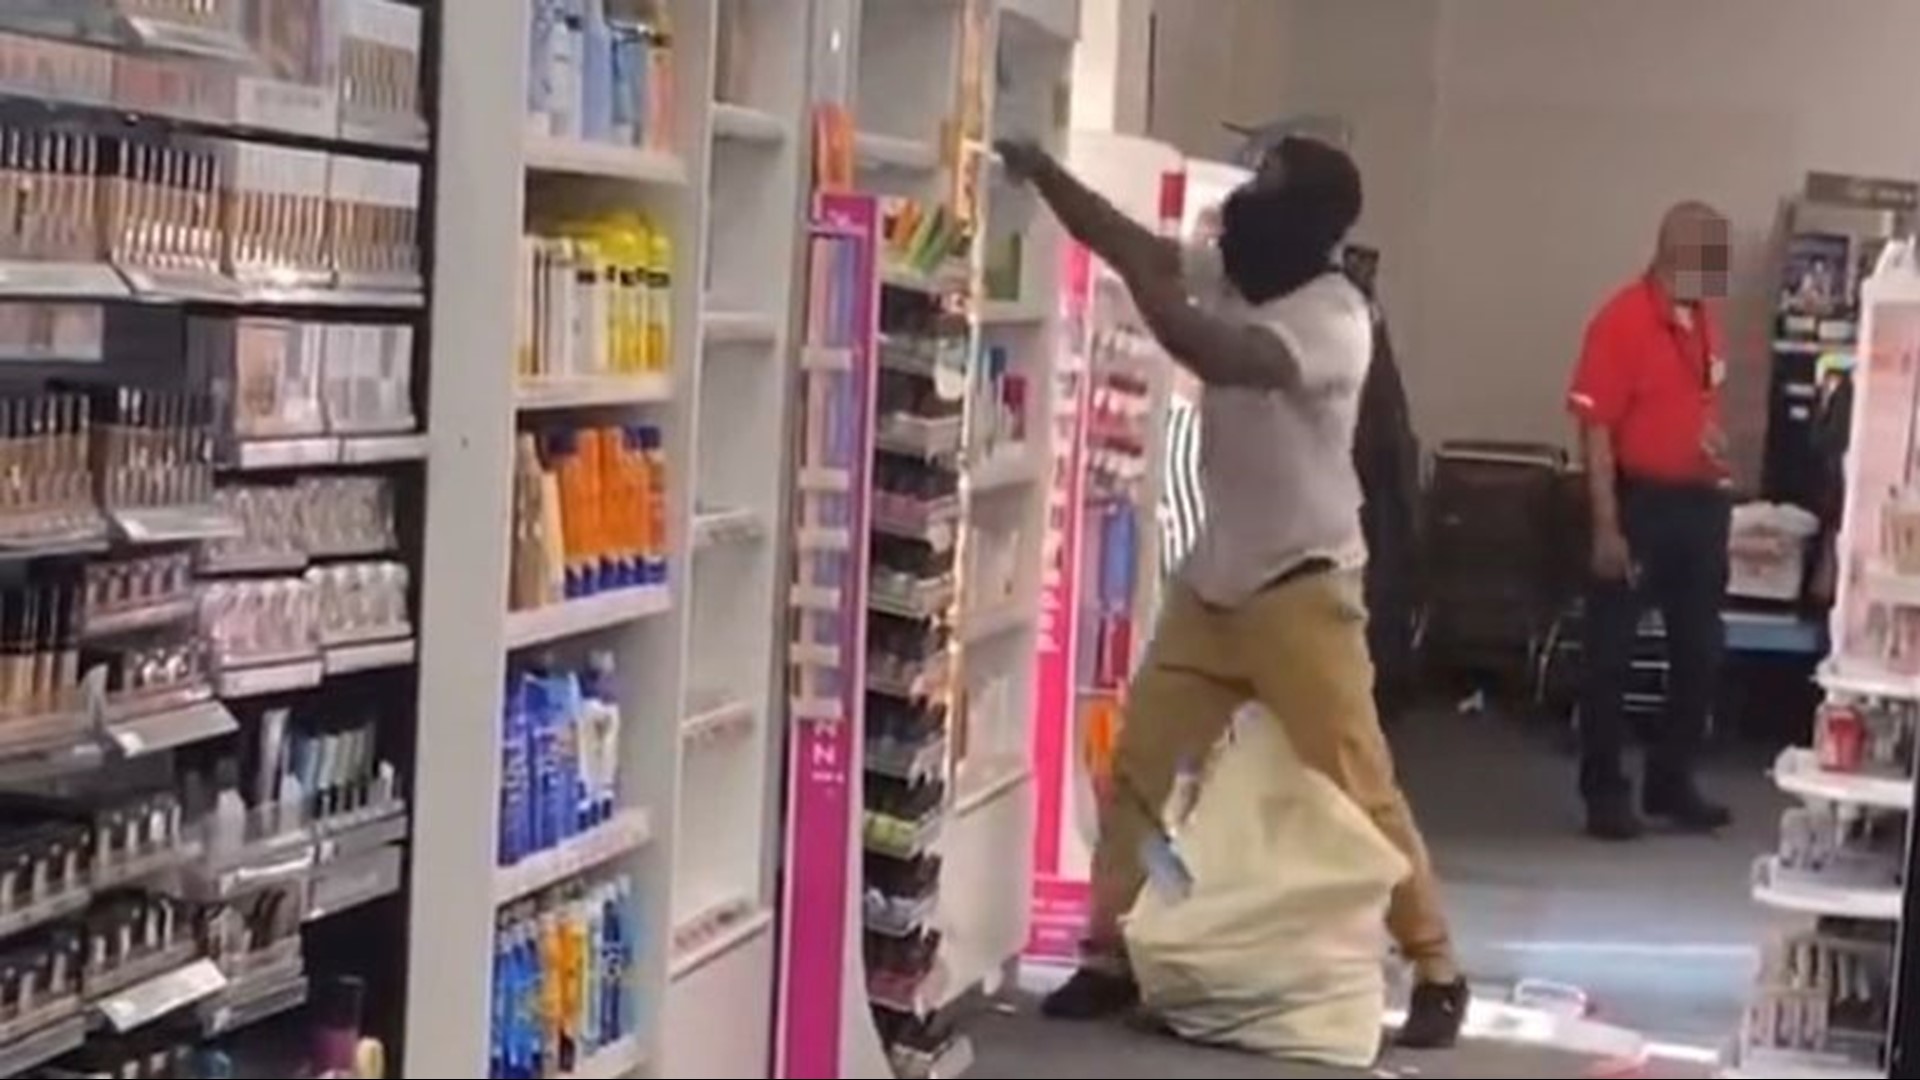 WUSA9 obtained a video taken inside the Bethesda CVS that appears to show people stealing large bags of product.